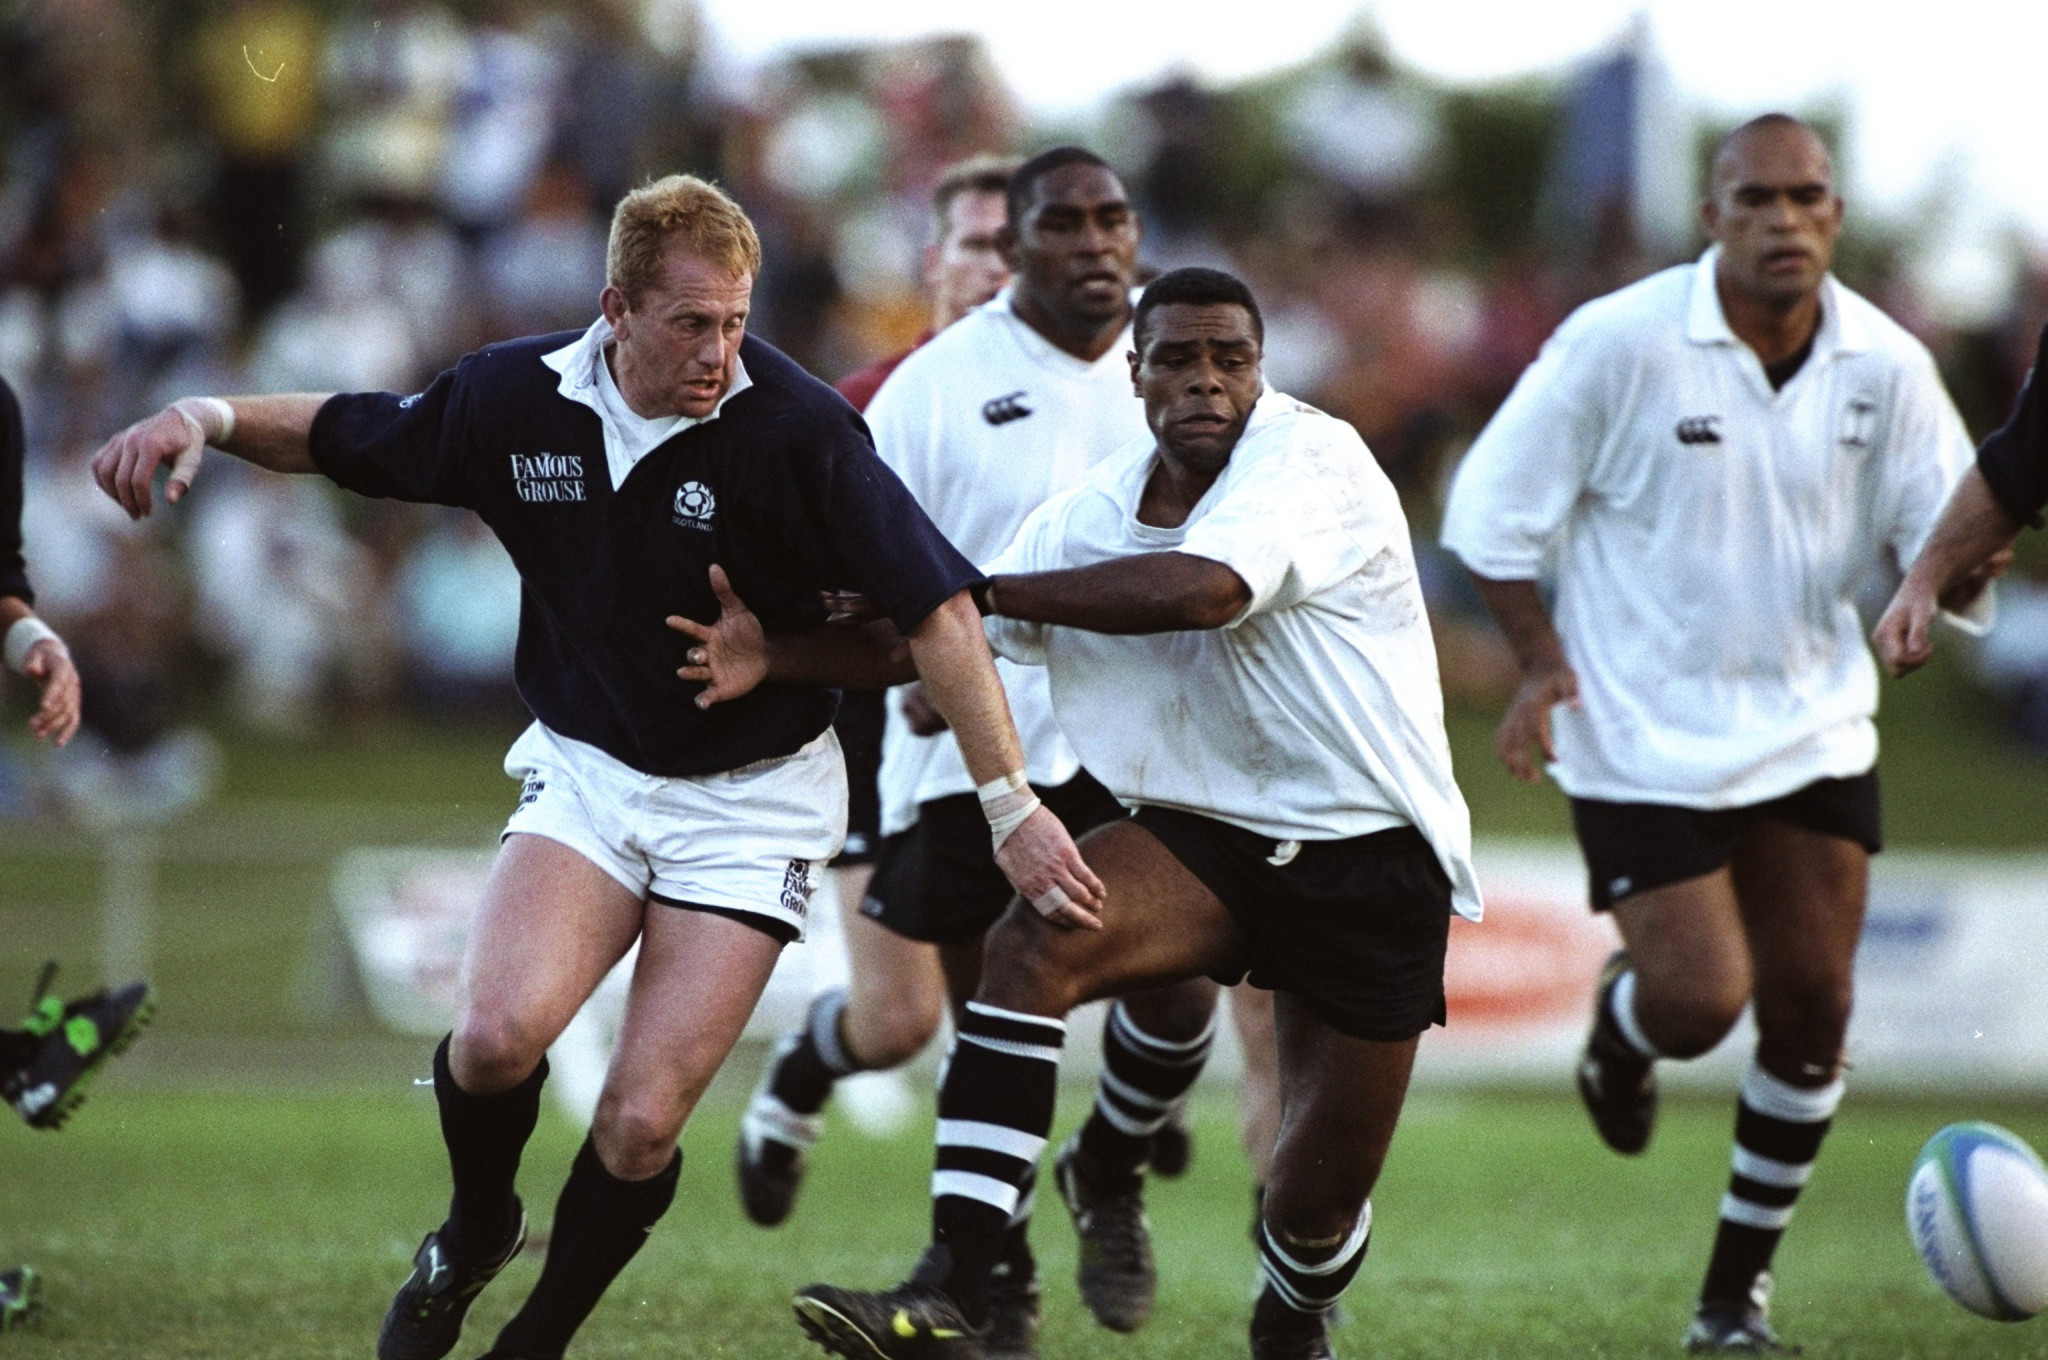 Former rugby union international Sale Sorovaki is Fiji's Chef de Mission for Birmingham 2022 ©Getty Images